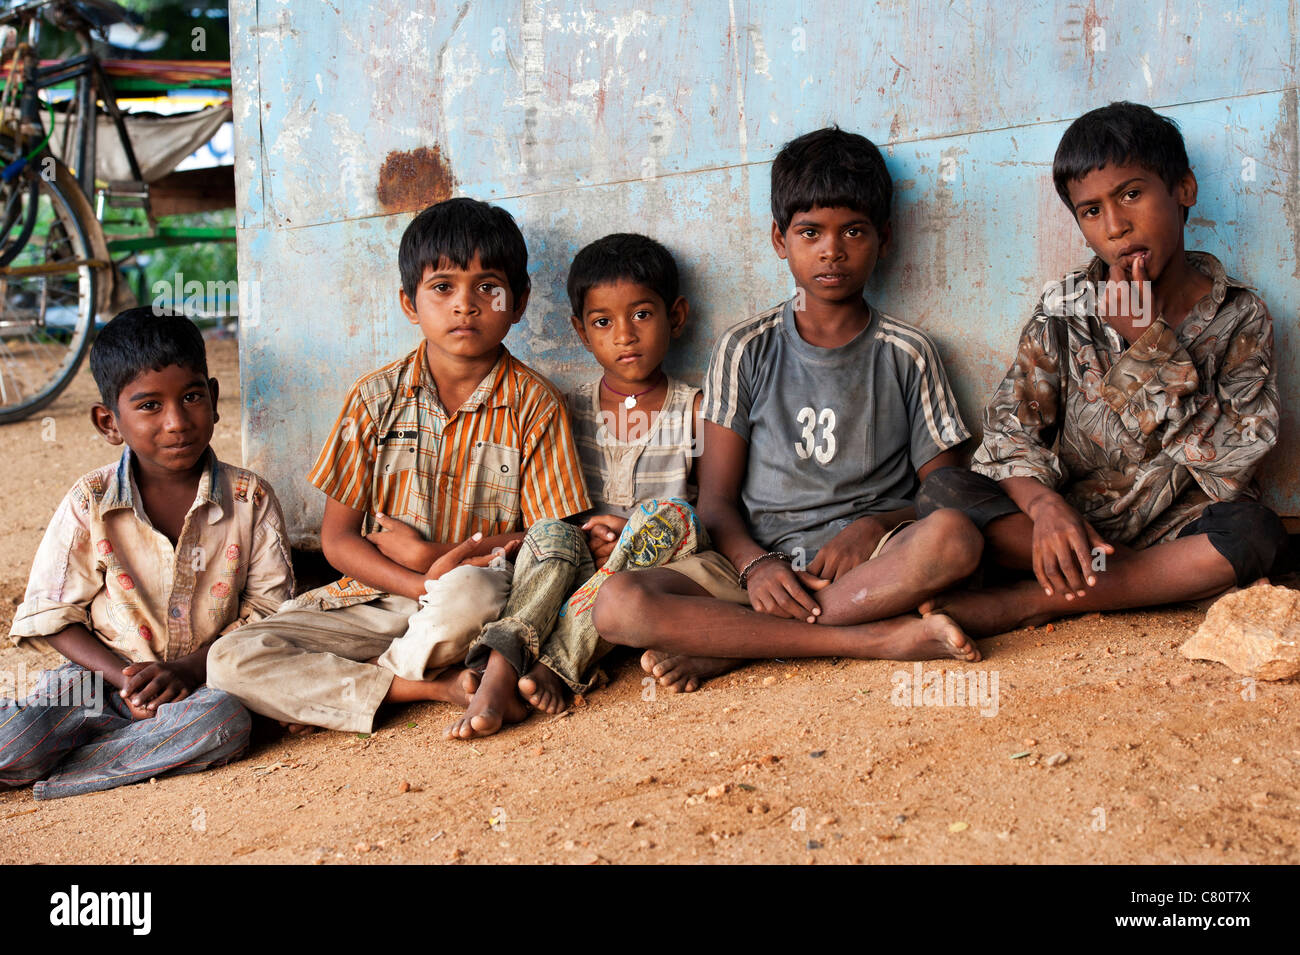 Young poor lower caste Indian street children. Andhra Pradesh, India Stock Photo